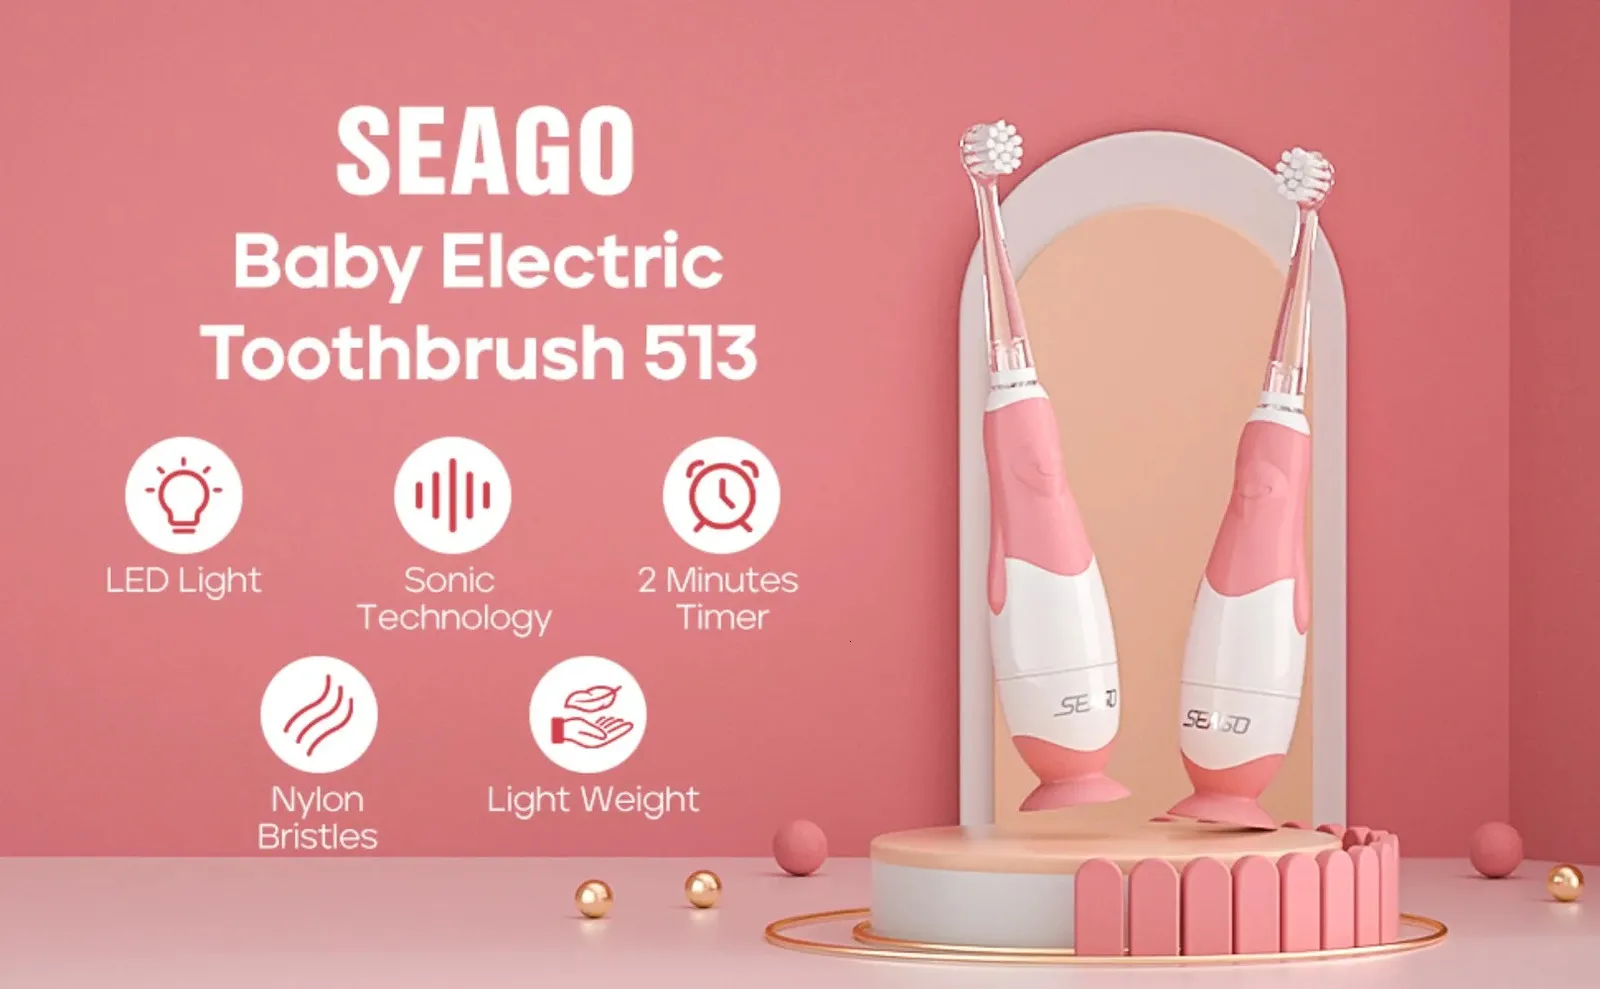 SEAGO baby electric toothbrush 513